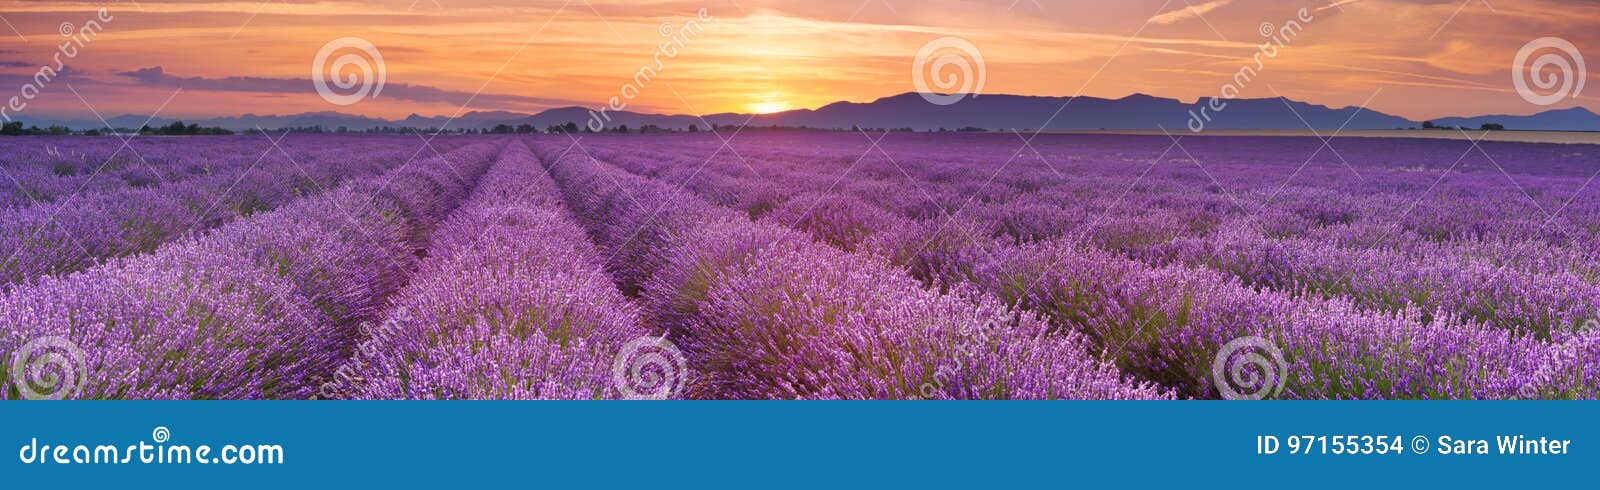 sunrise over fields of lavender in the provence, france